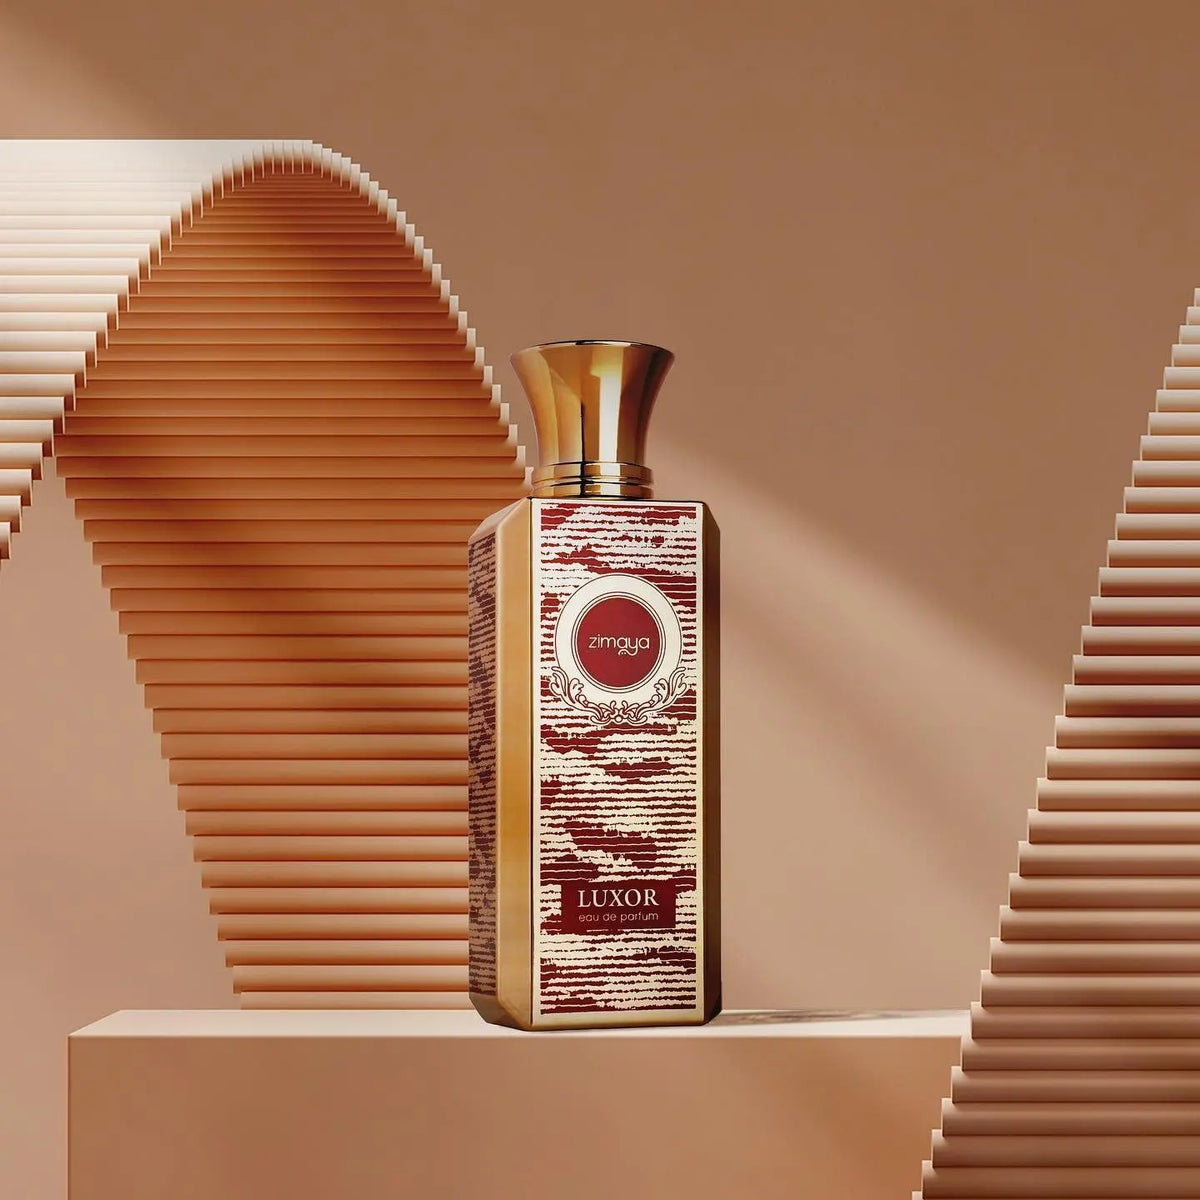 The image shows a bottle of "Luxor" eau de parfum by Zimaya. The perfume bottle is tall and rectangular with a gold cap. The label features intricate designs in red and gold, with the brand name "zimaya" in a circular emblem near the top. The word "Luxor" is written in bold at the bottom of the label, along with "eau de parfum." The background consists of a sophisticated, abstract design with beige tones and curved, ribbed structures, enhancing the luxurious and elegant presentation of the product.